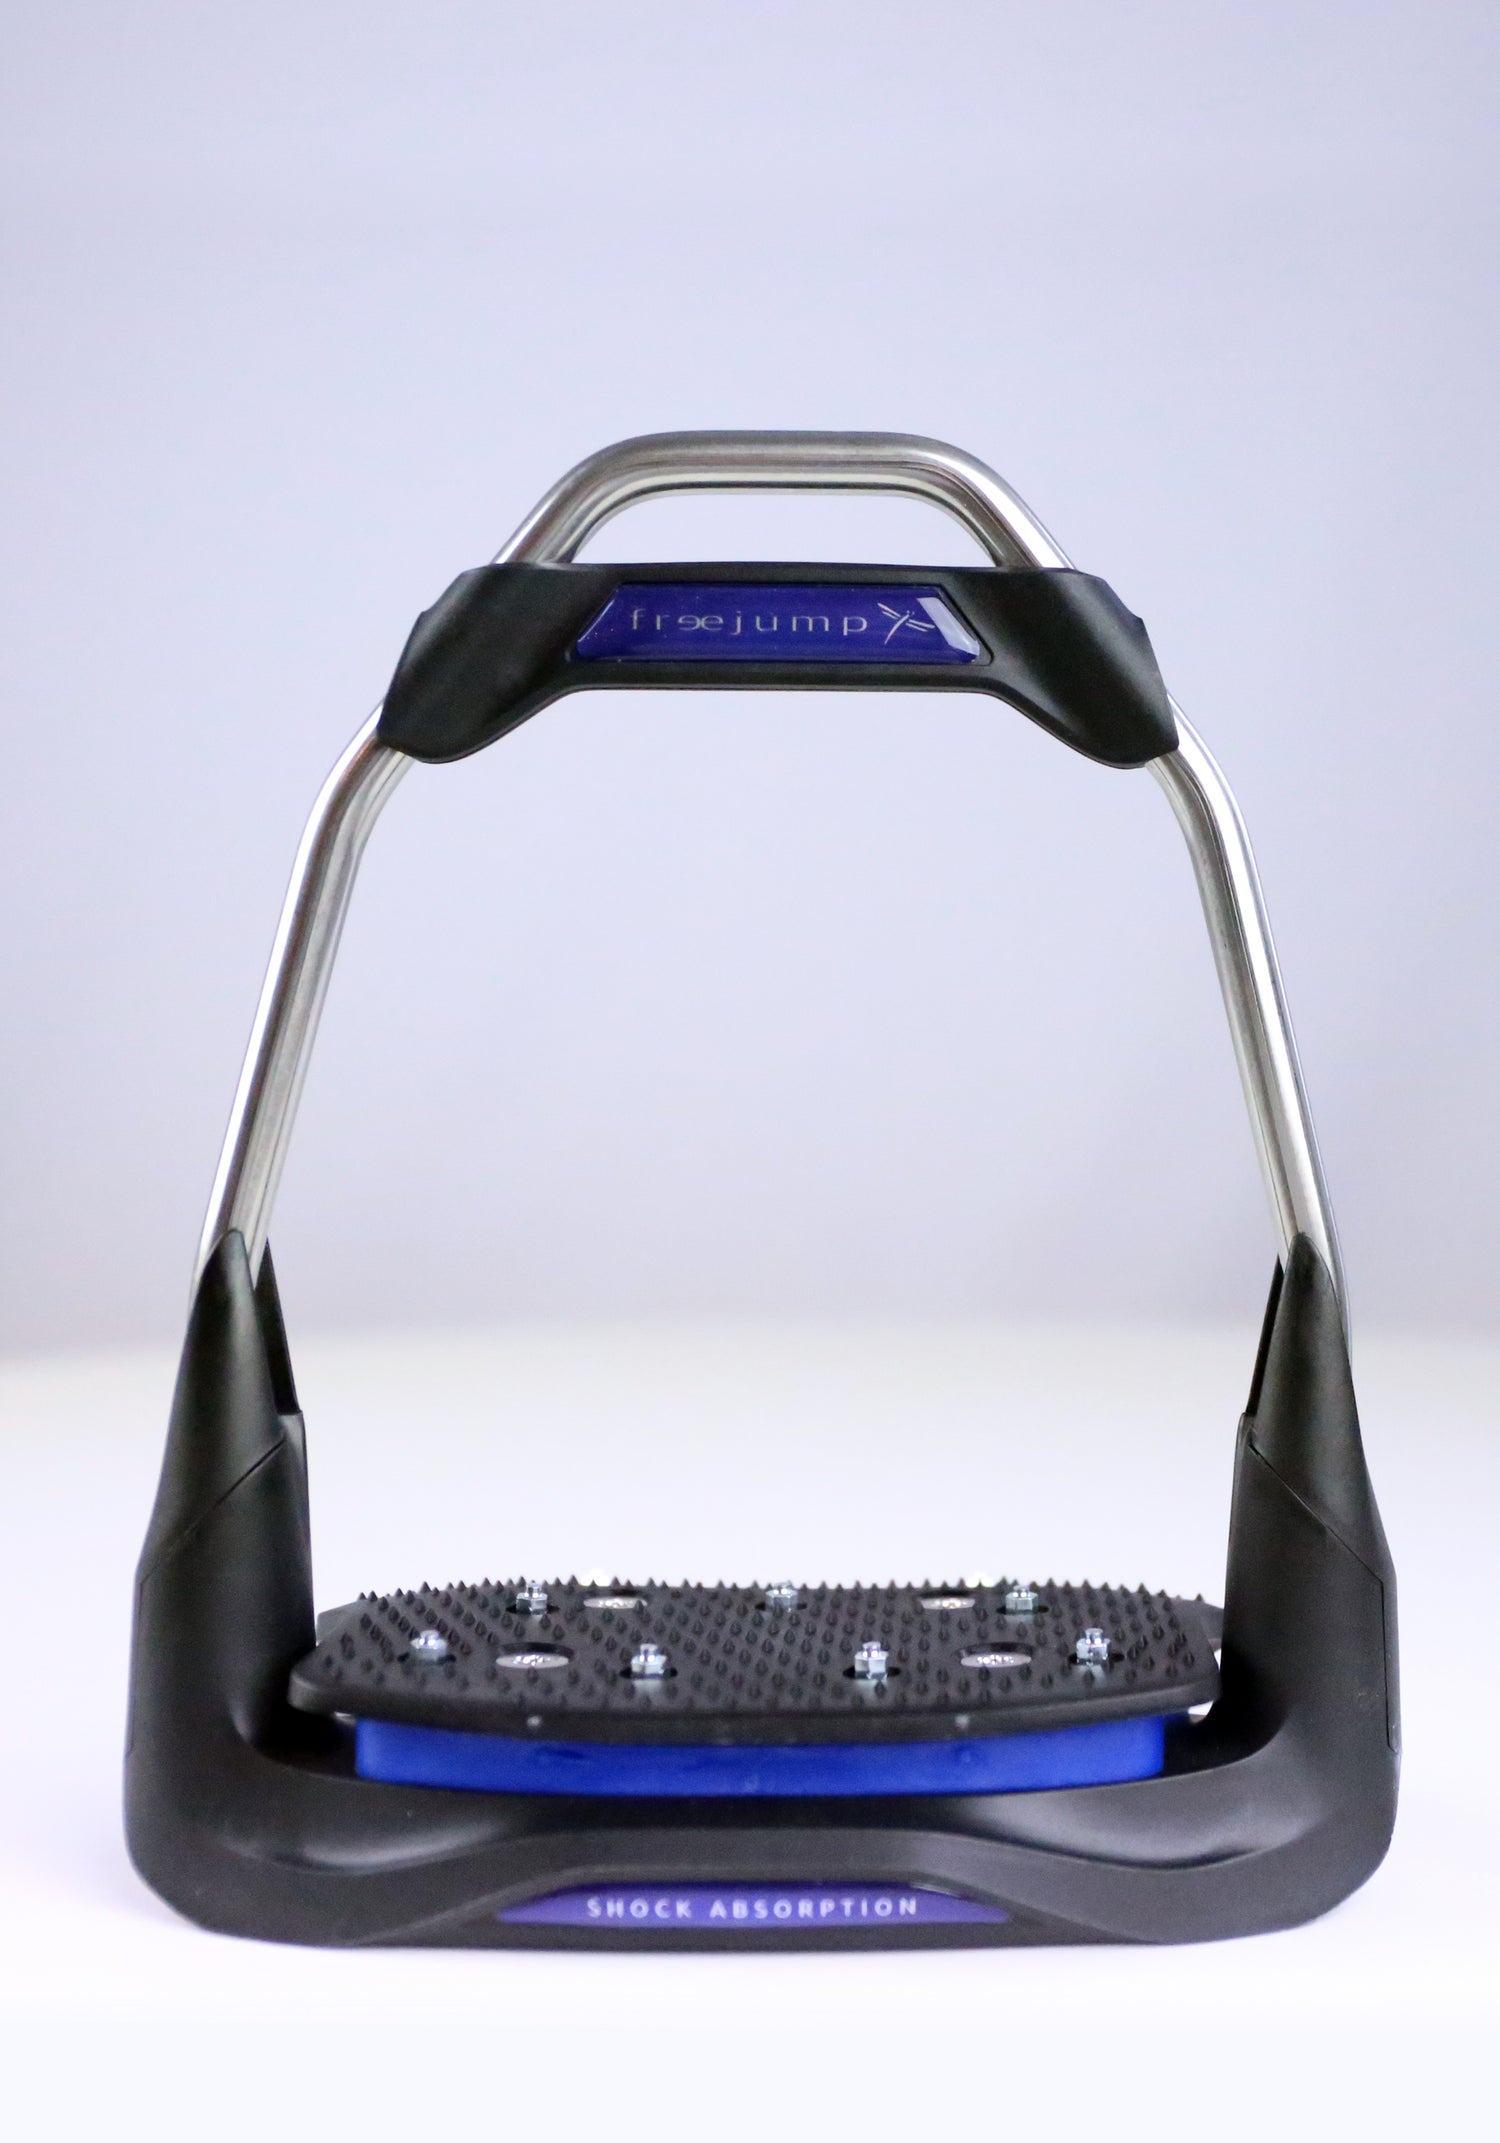 freejump new stirrups with shock absorbtion